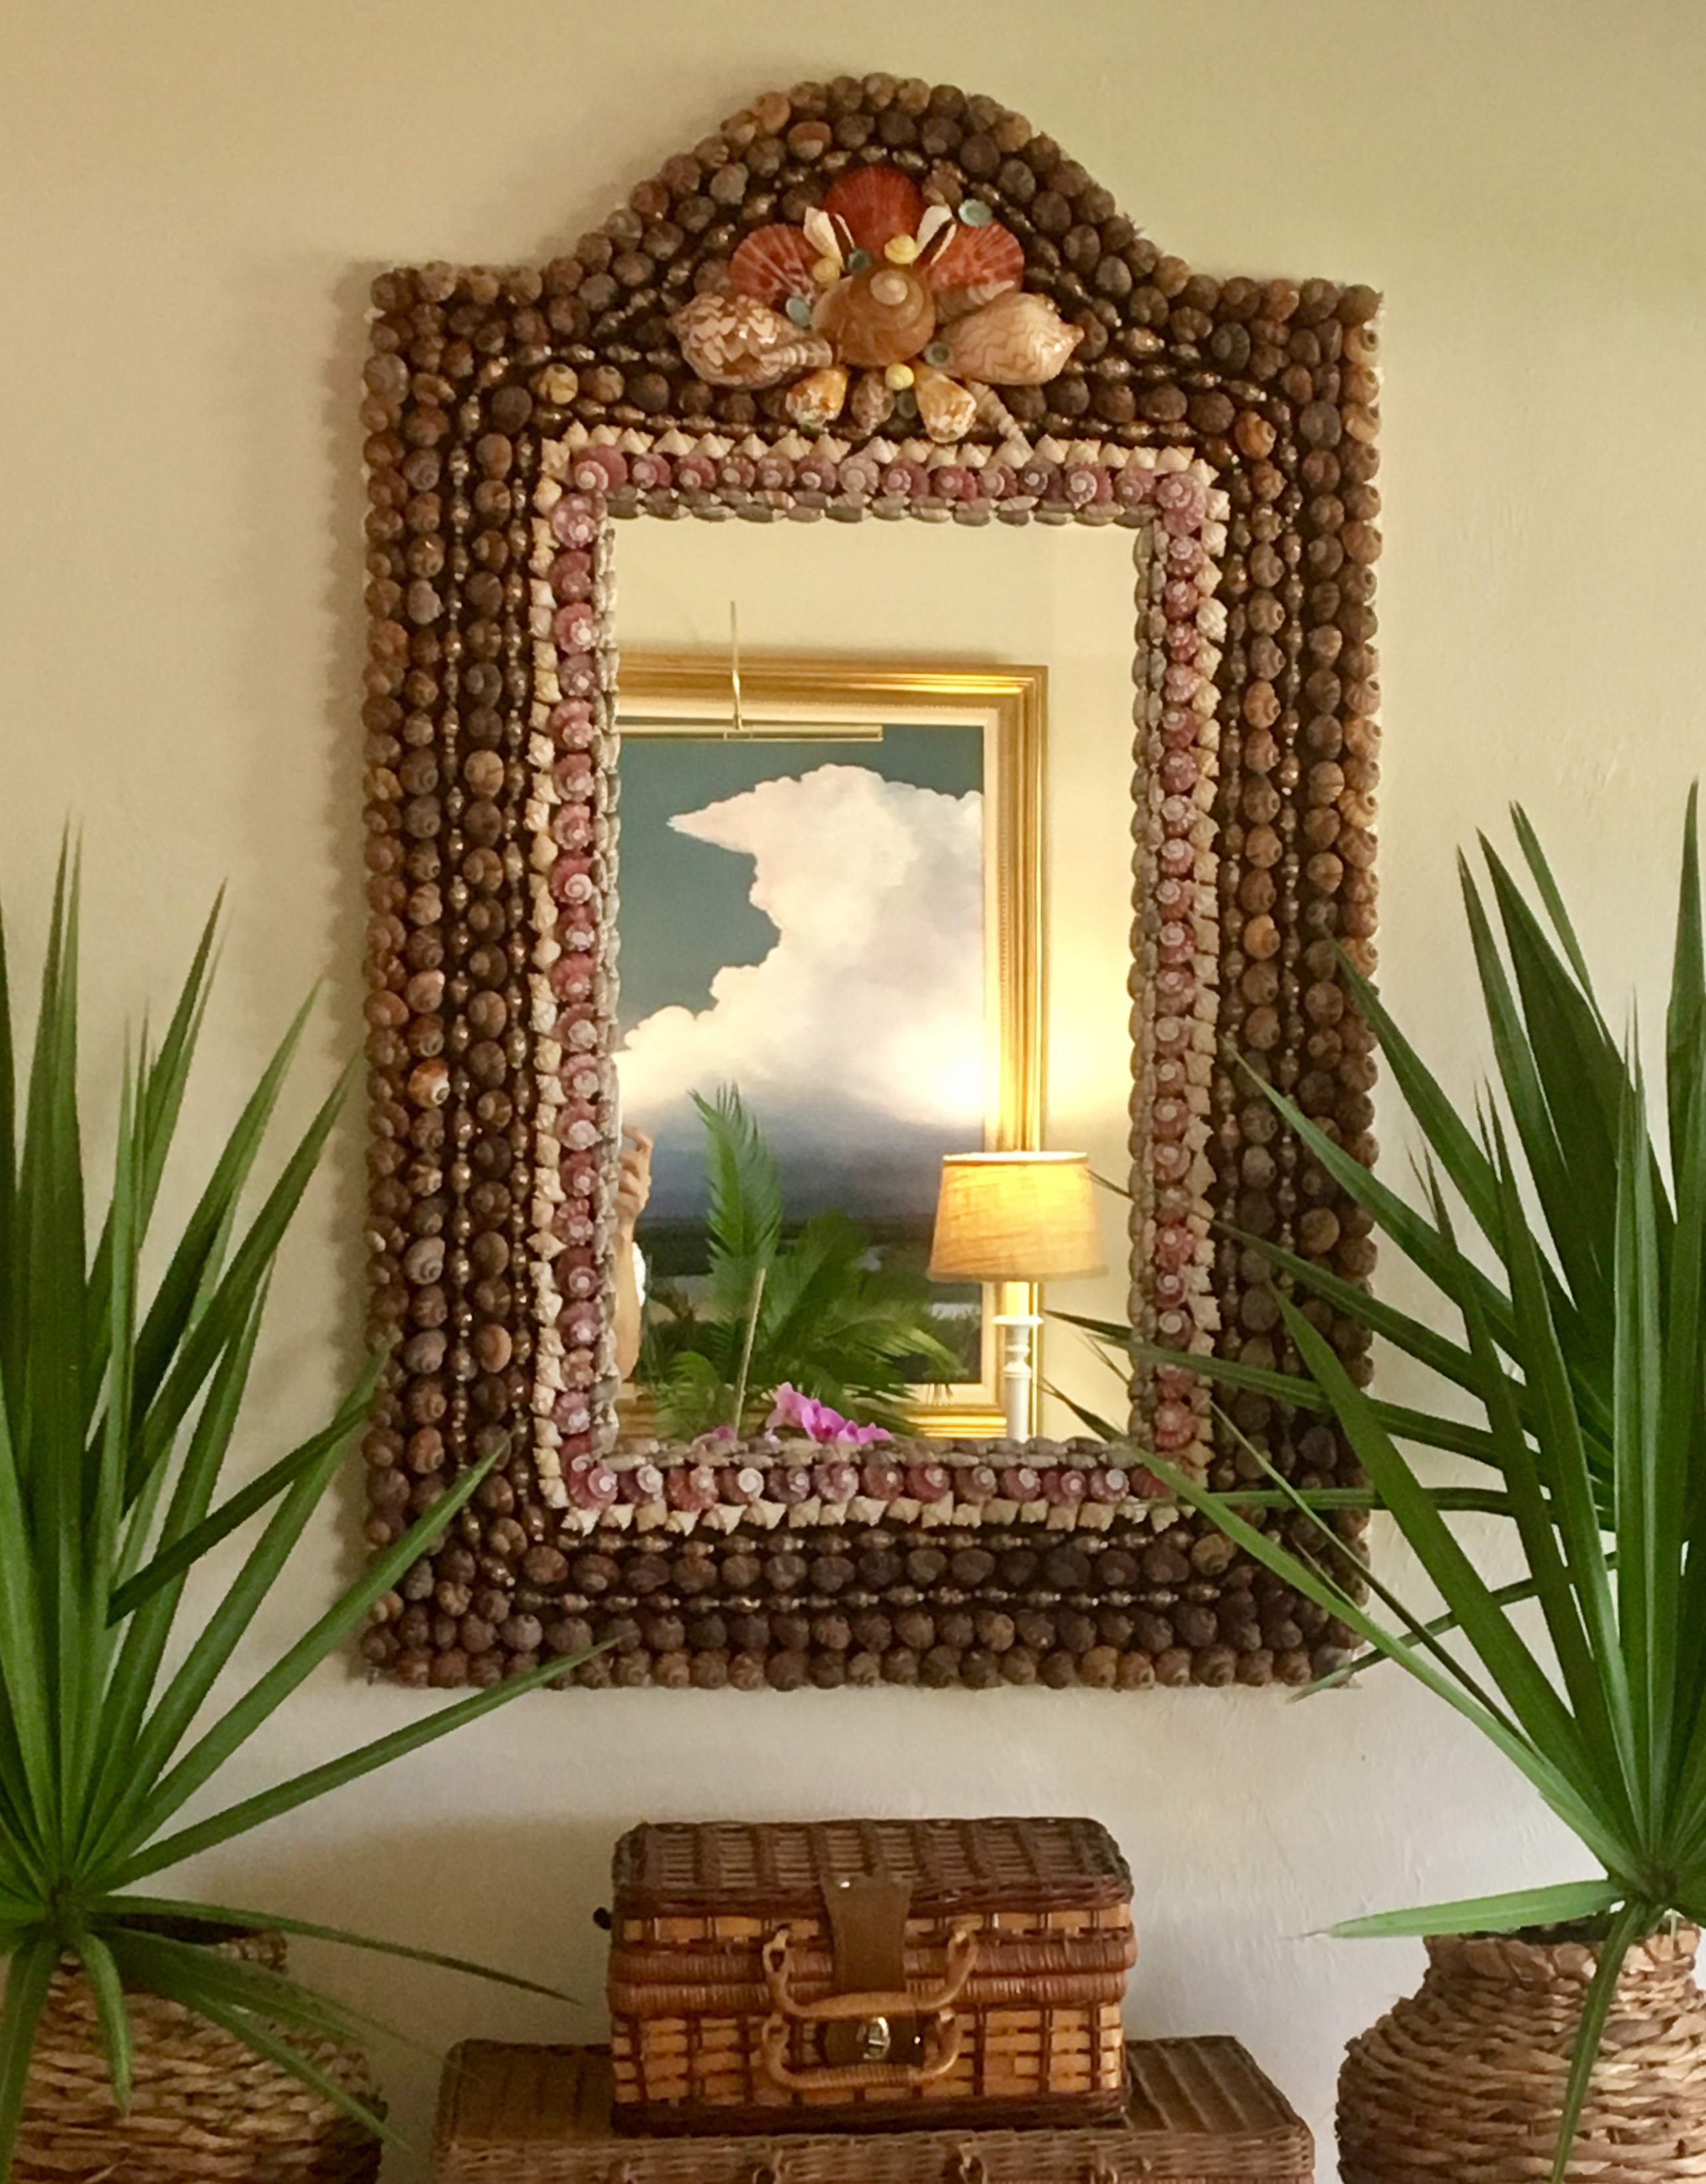 A rectangular mirror made with brown and red shells hangs on a wall with a painting with clouds refits in the mirror.